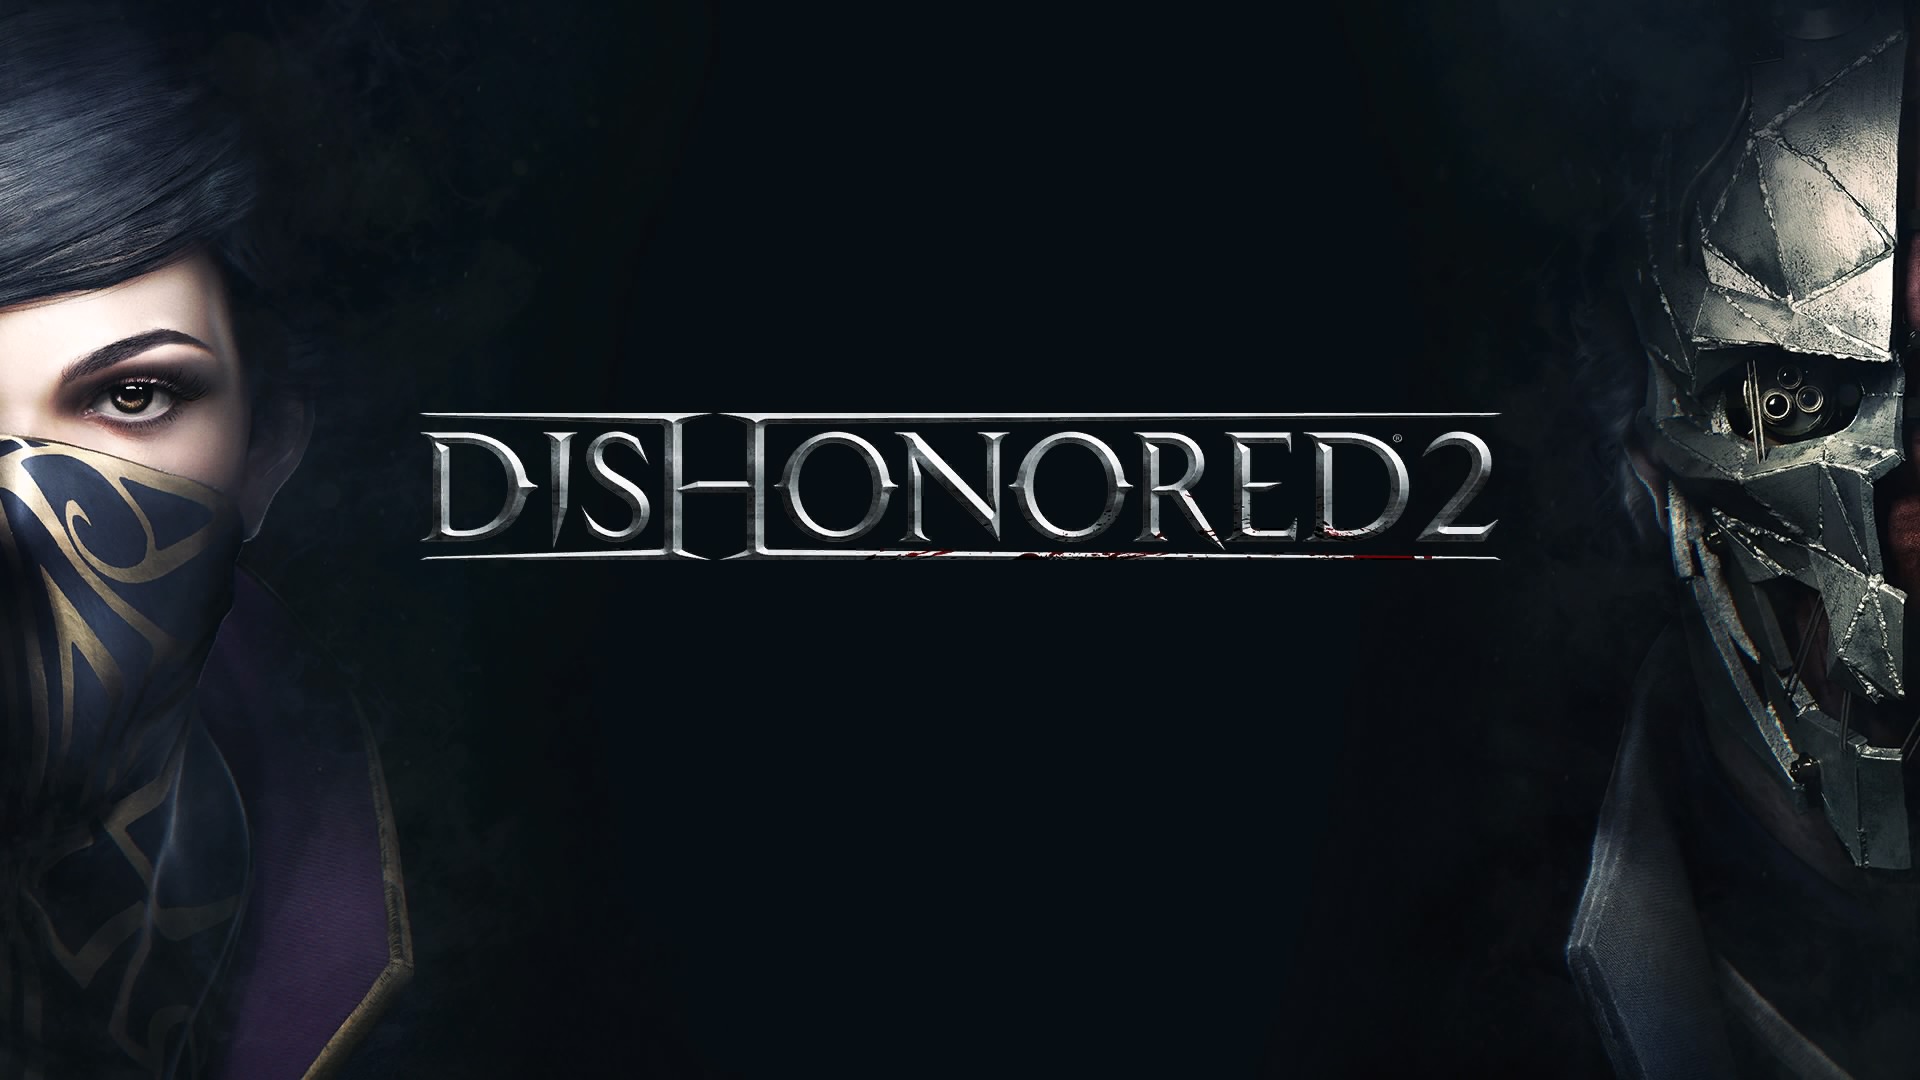 Análisis | Dishonored 2